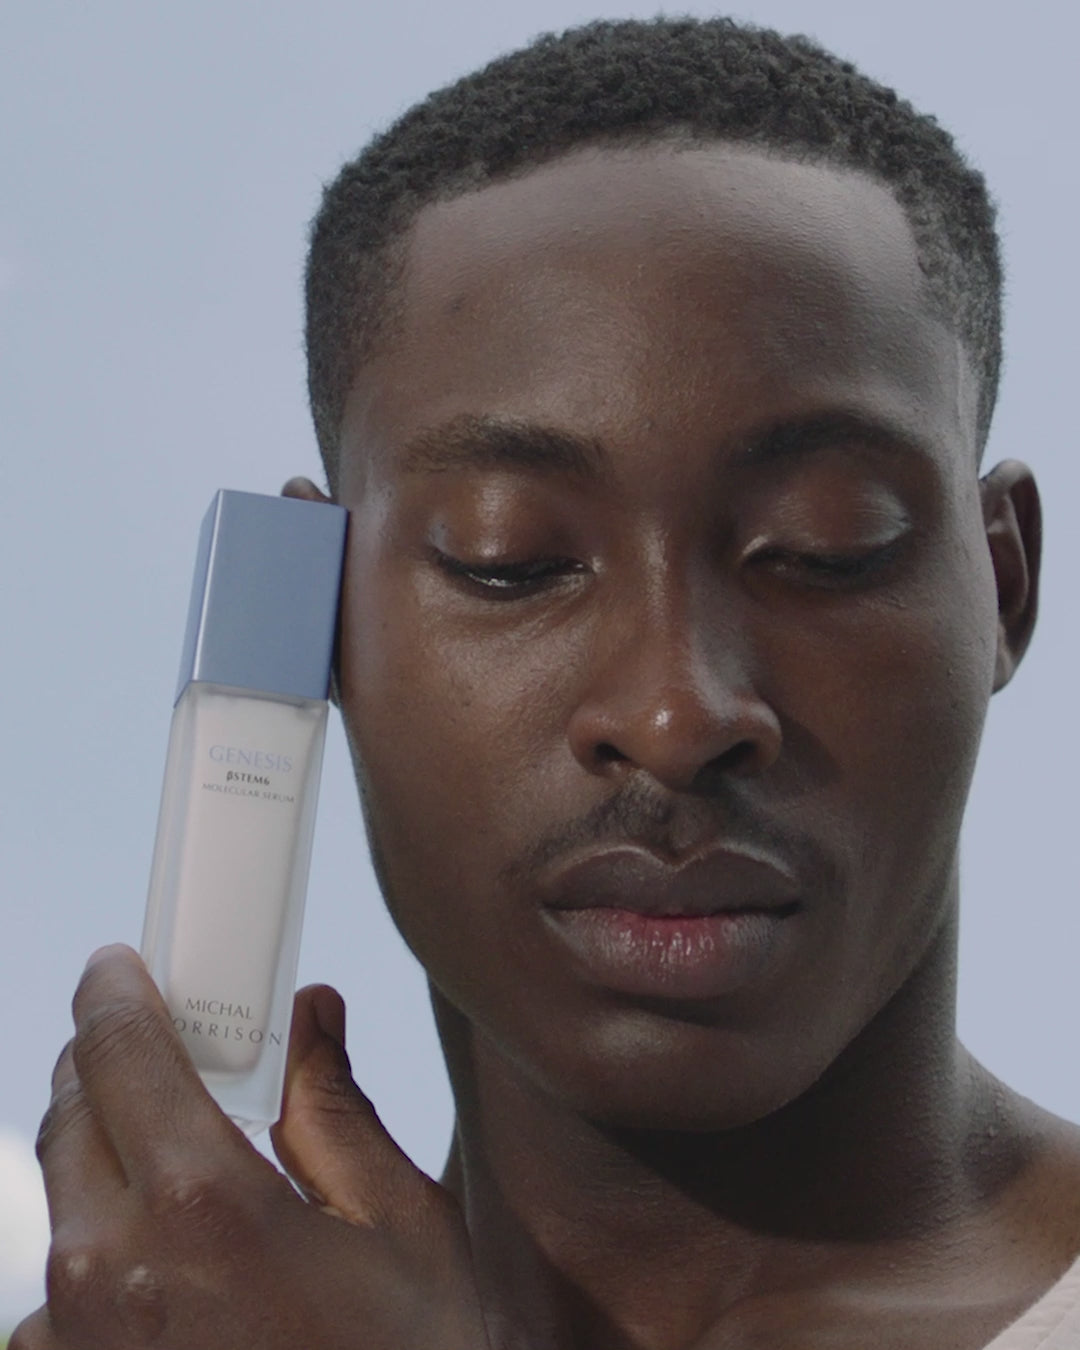 Video showing How-To instructions for using Michal Morrison Genesis BSTEM6 Molecular Serum. Video shows African American male model applying the serum, as well as close up of a set of hands pumping the serum into their palm. Video text reads, "After cleansing, use one pump, Apply to skin on the face and neck, Safe to use in conjunction with any actives such as retinoids and Vitamin C, Radiant. Revitalized. Renewed., Michal Morrison, Where Beauty Begins."